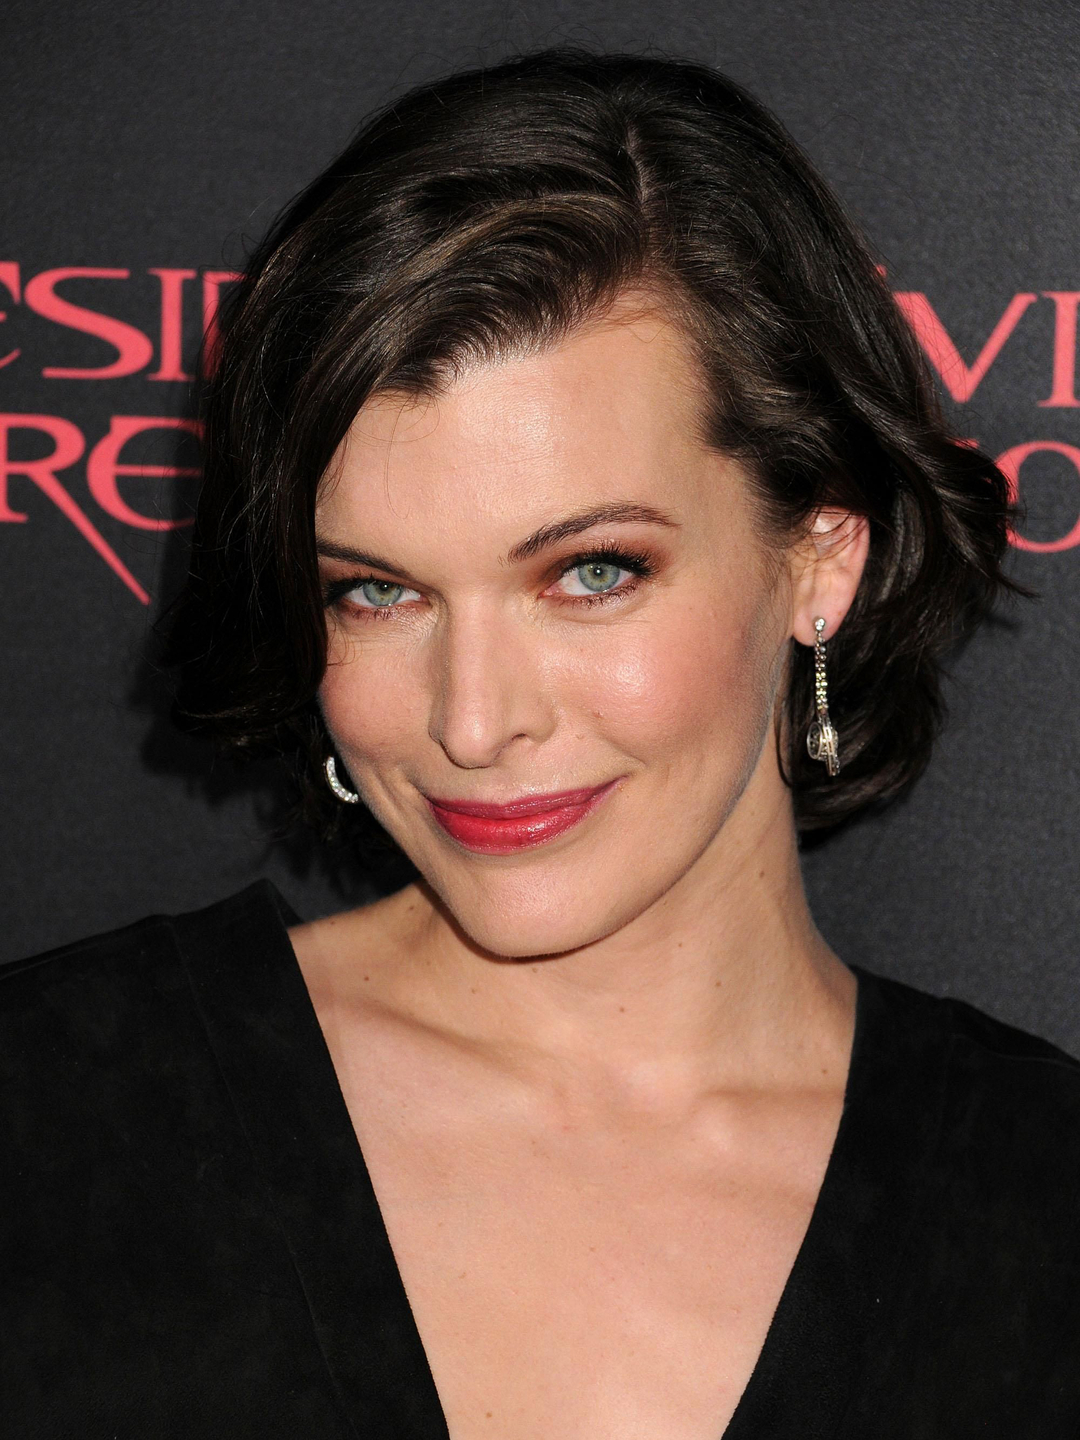 Milla Jovovich does she have a husband